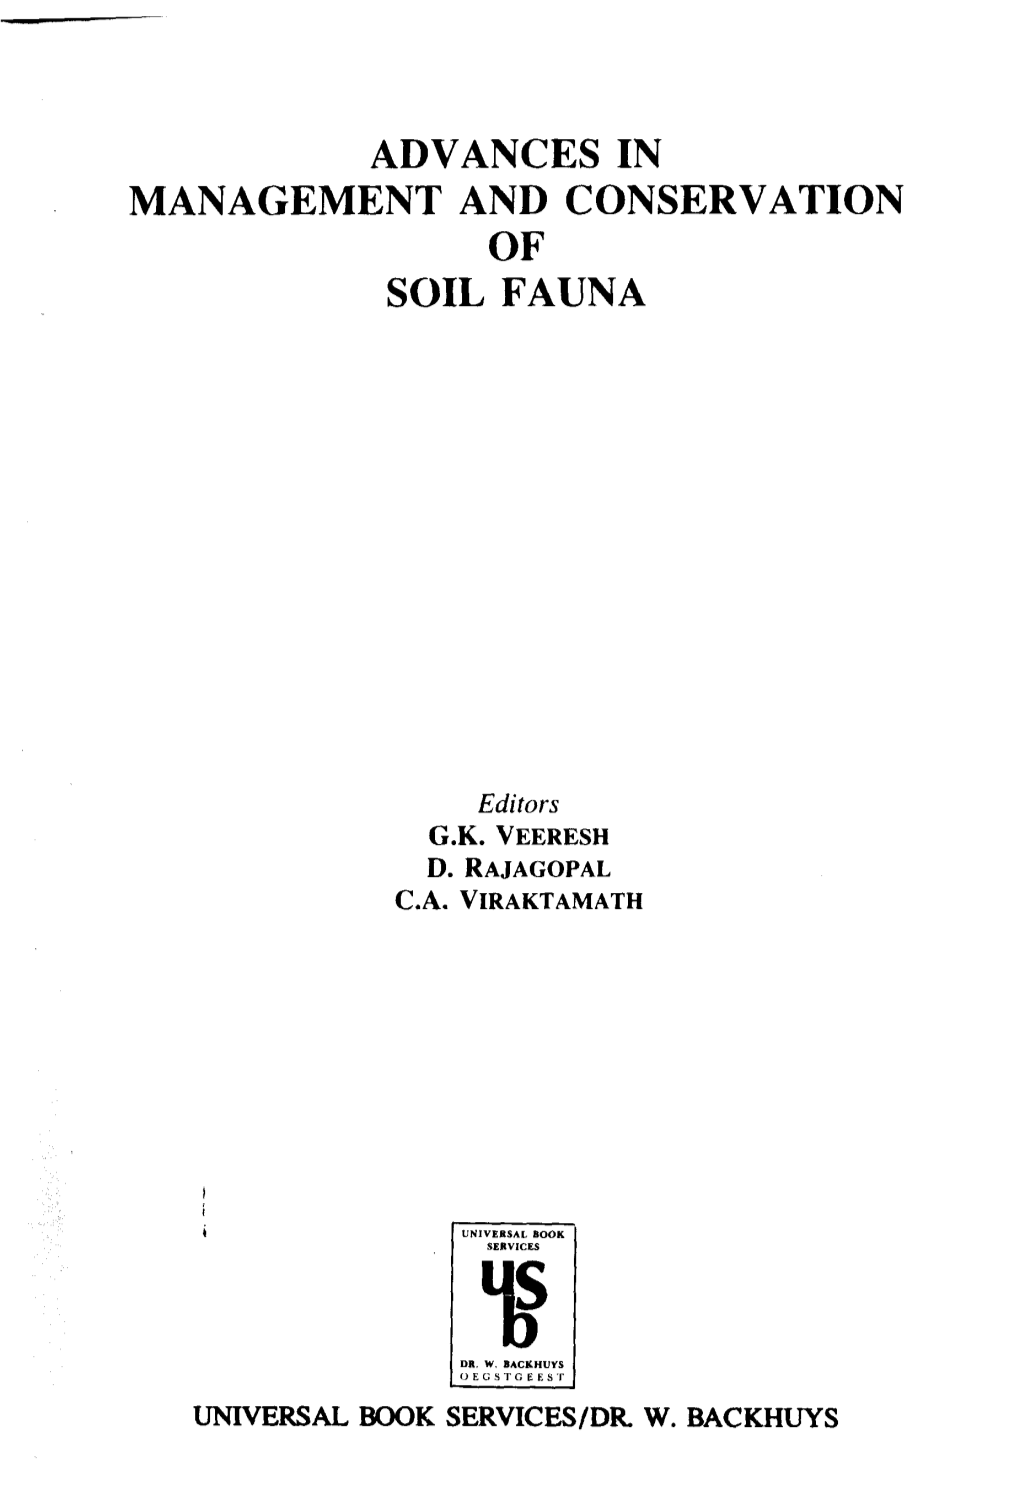 Advances in Management and Conservation of Soil Fauna